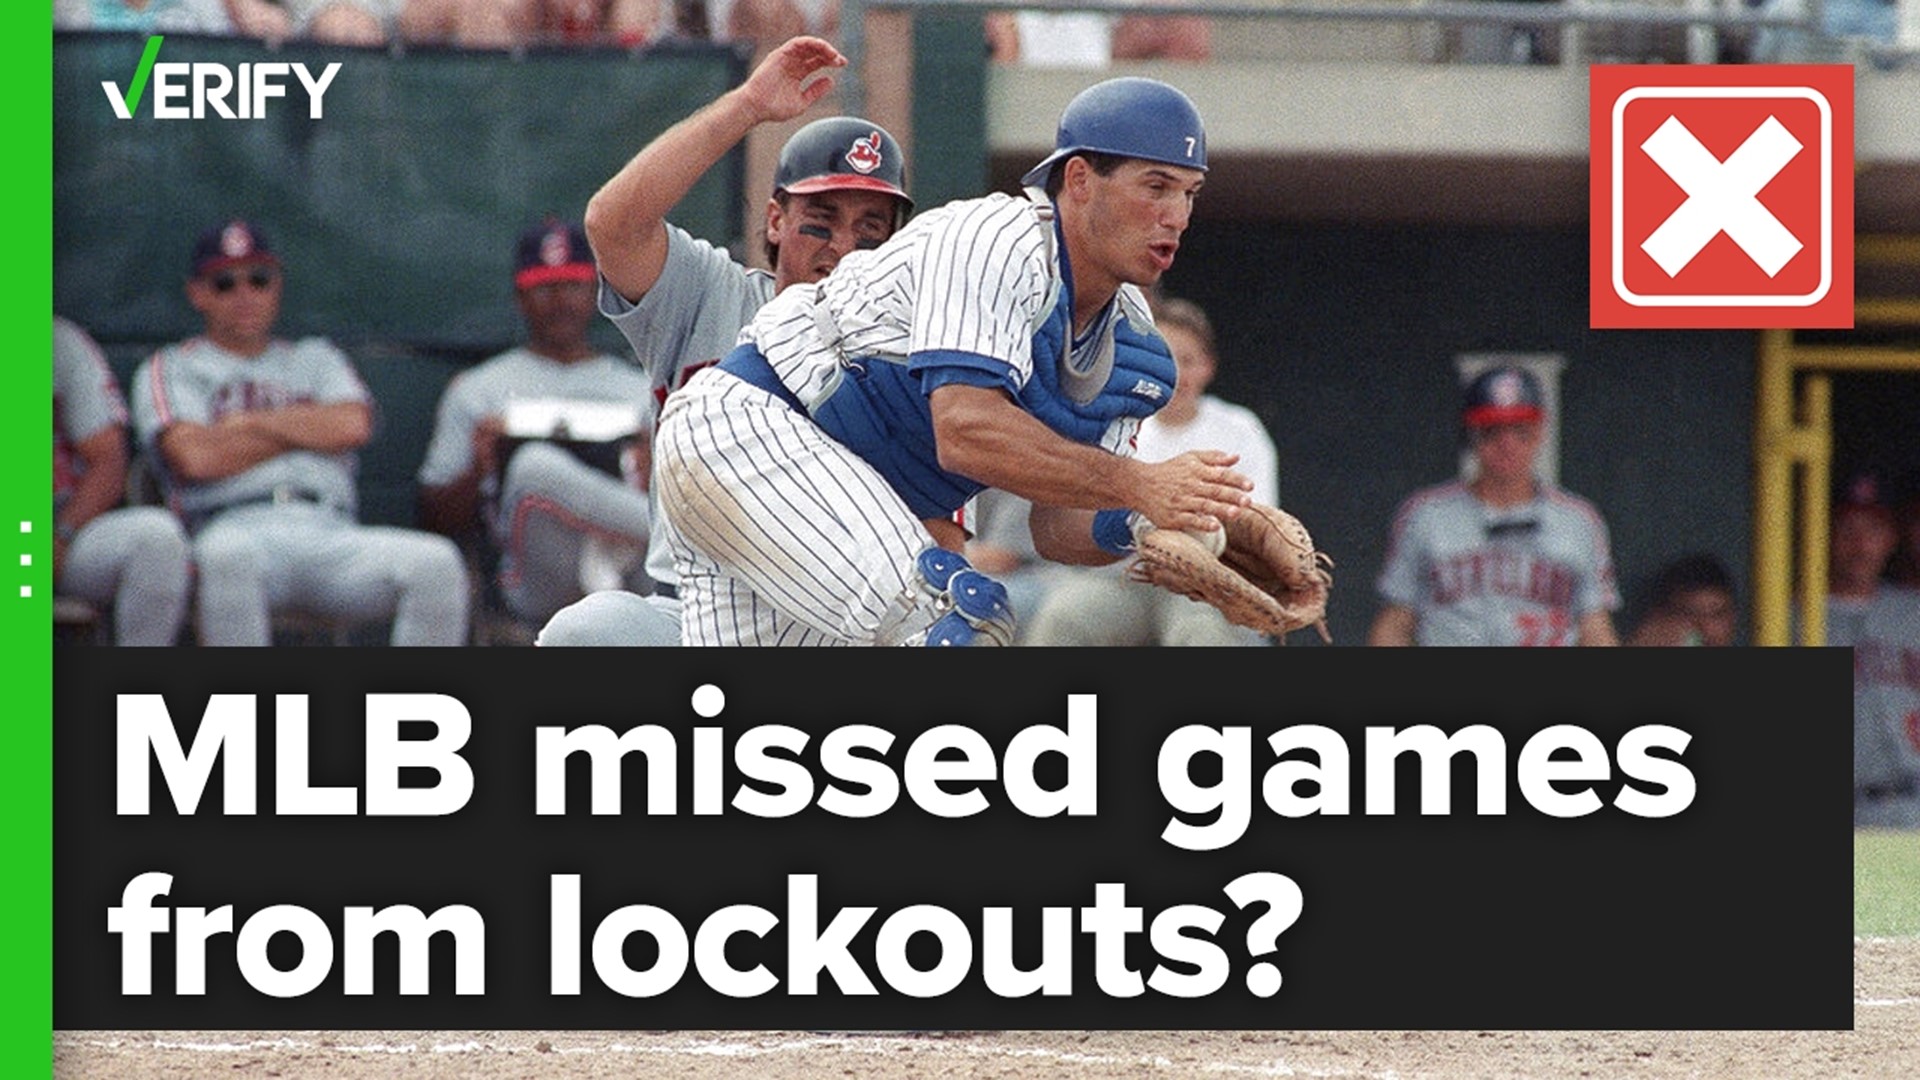 A lockout — often confused with a player strike — is when the owners prevent the players from playing. The MLB has only ever missed games because of strikes.